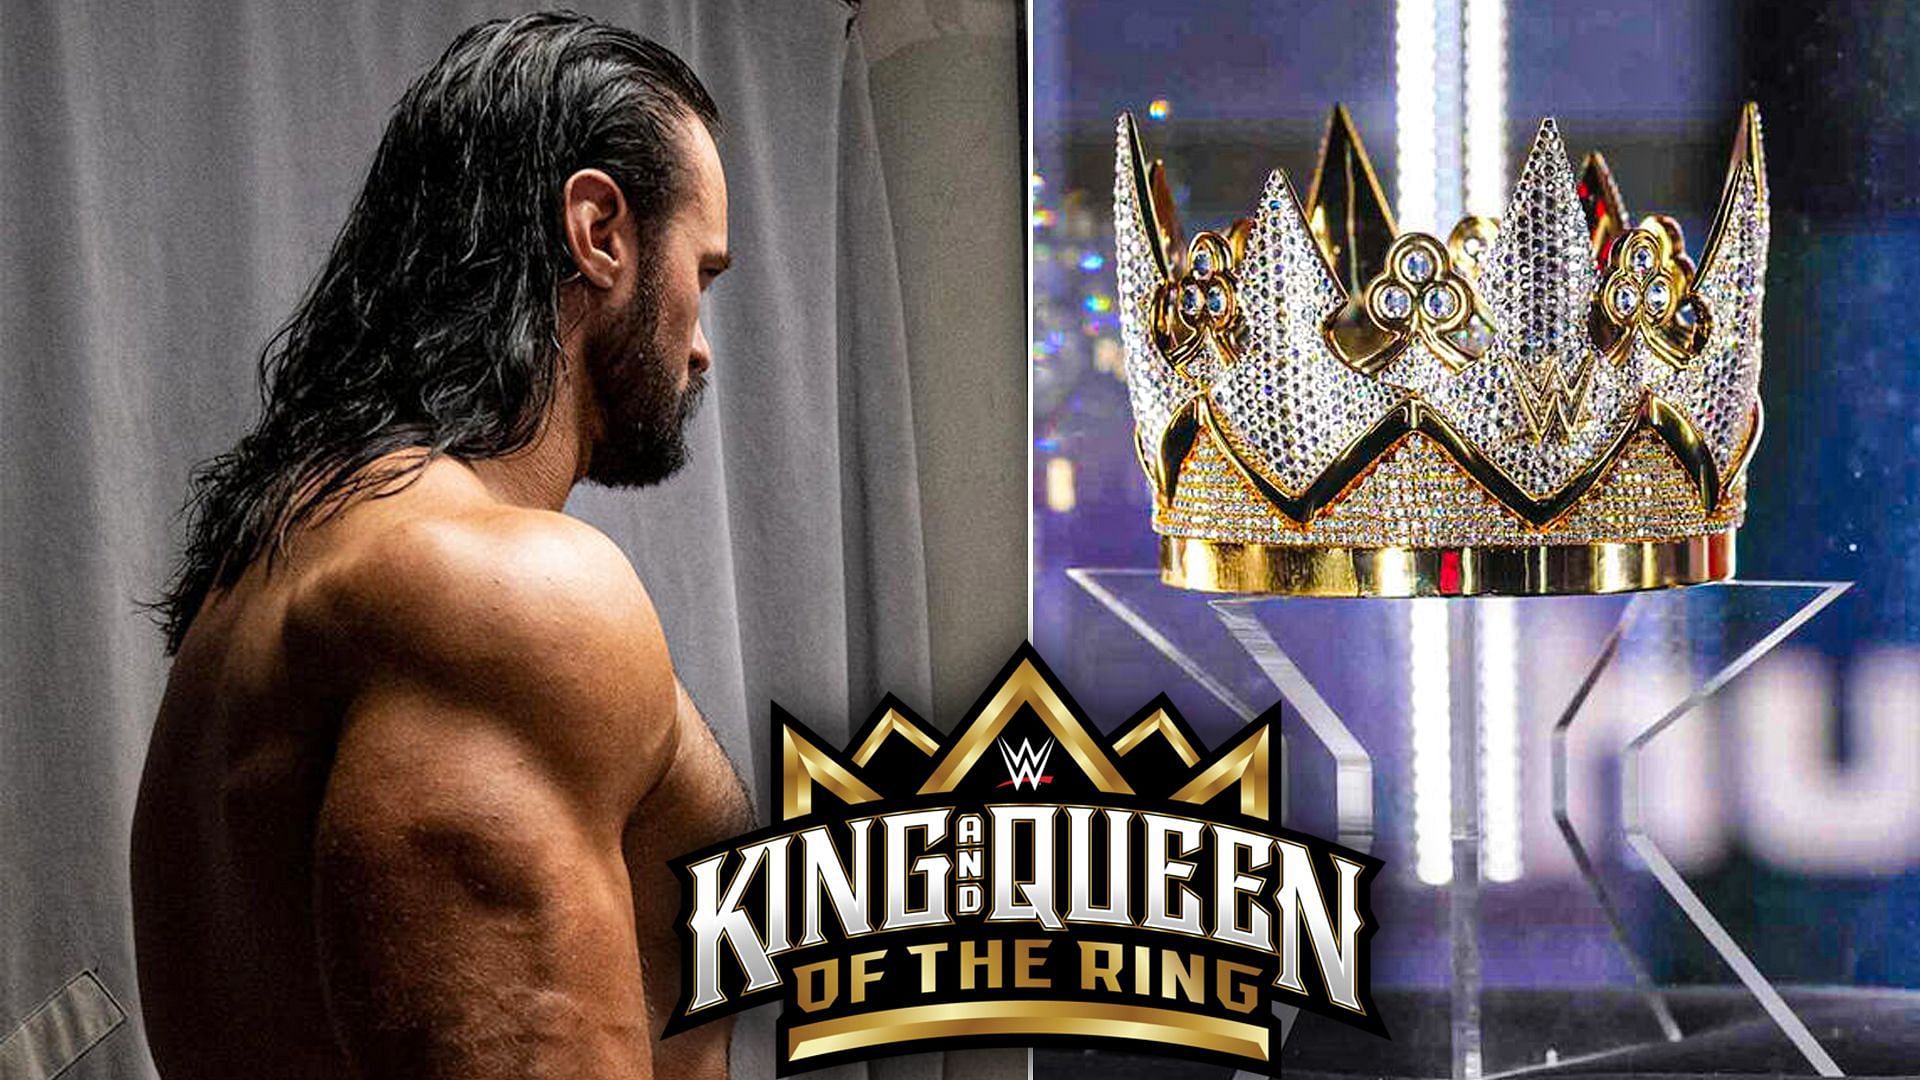 King and Queen of the Ring